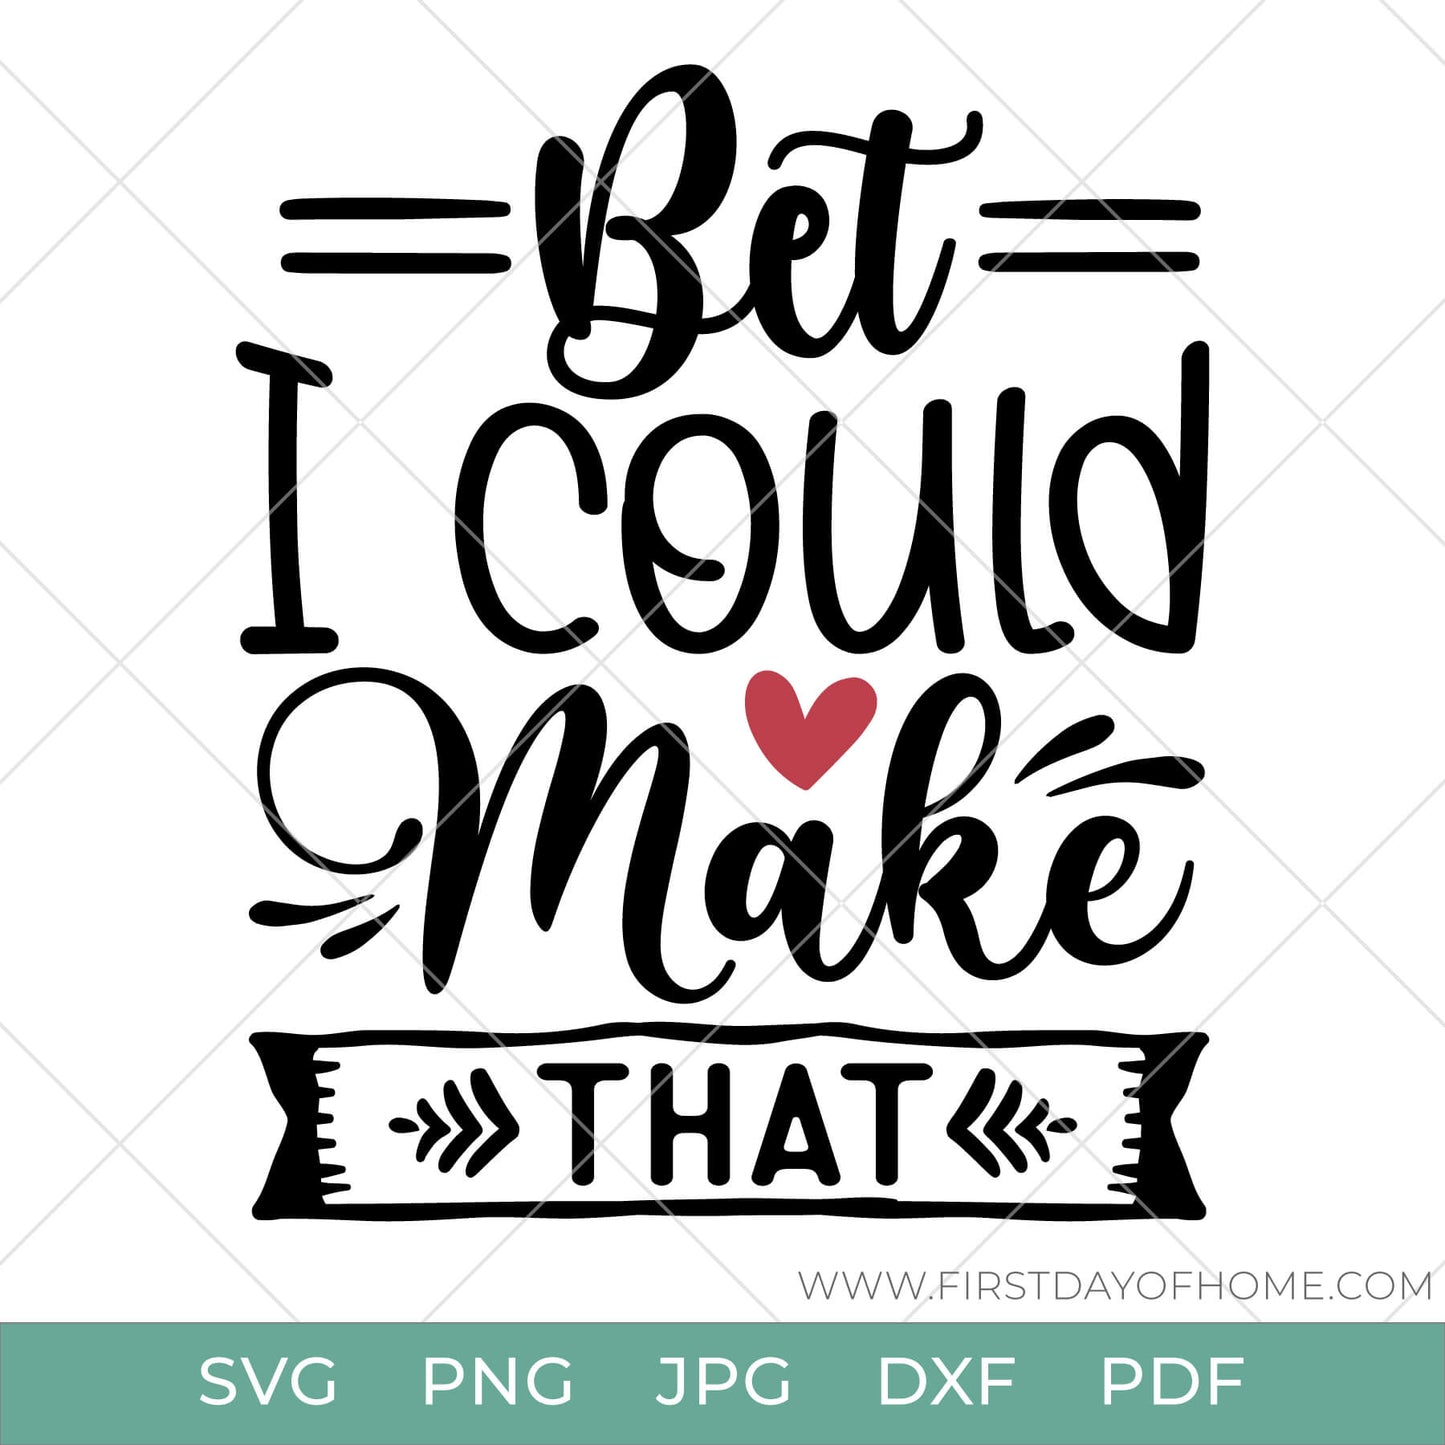 Bet I Could Make That digital design with heart compatible with Cricut or Cameo cutting machines